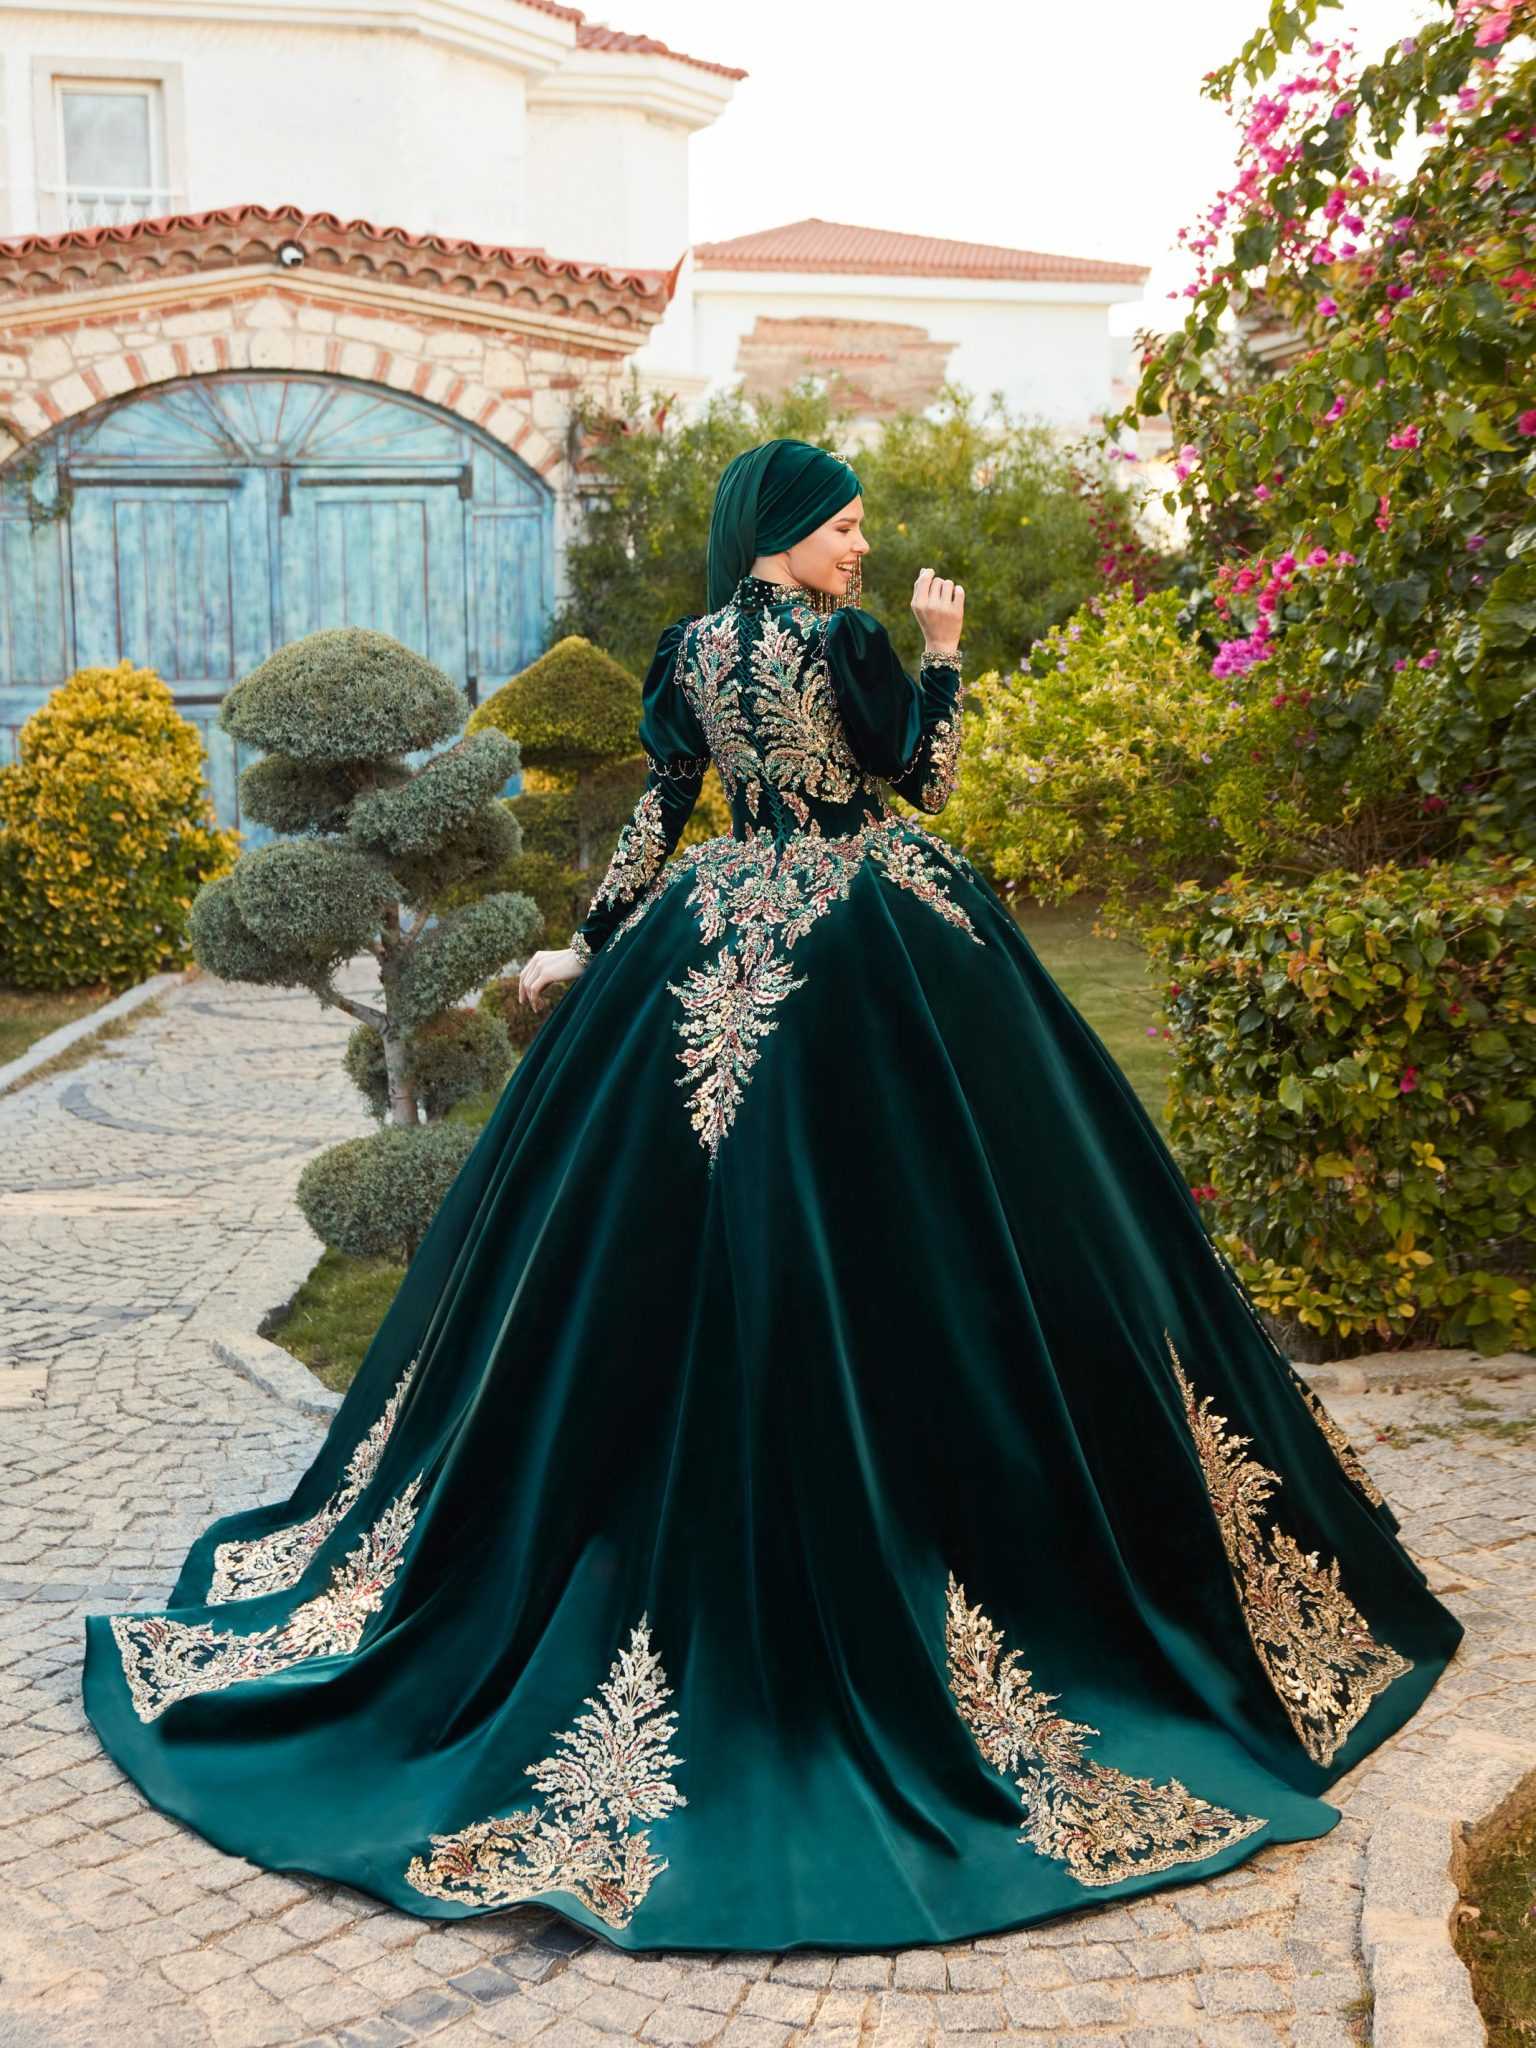 NEW DESIGNER BOTTLE GREEN GOWN FOX GEORGETTE WITH EMBROIDERY G33 –  𝐋𝐎𝐎𝐊𝐒 𝐀𝐍𝐃 𝐋𝐈𝐊𝐄𝐒